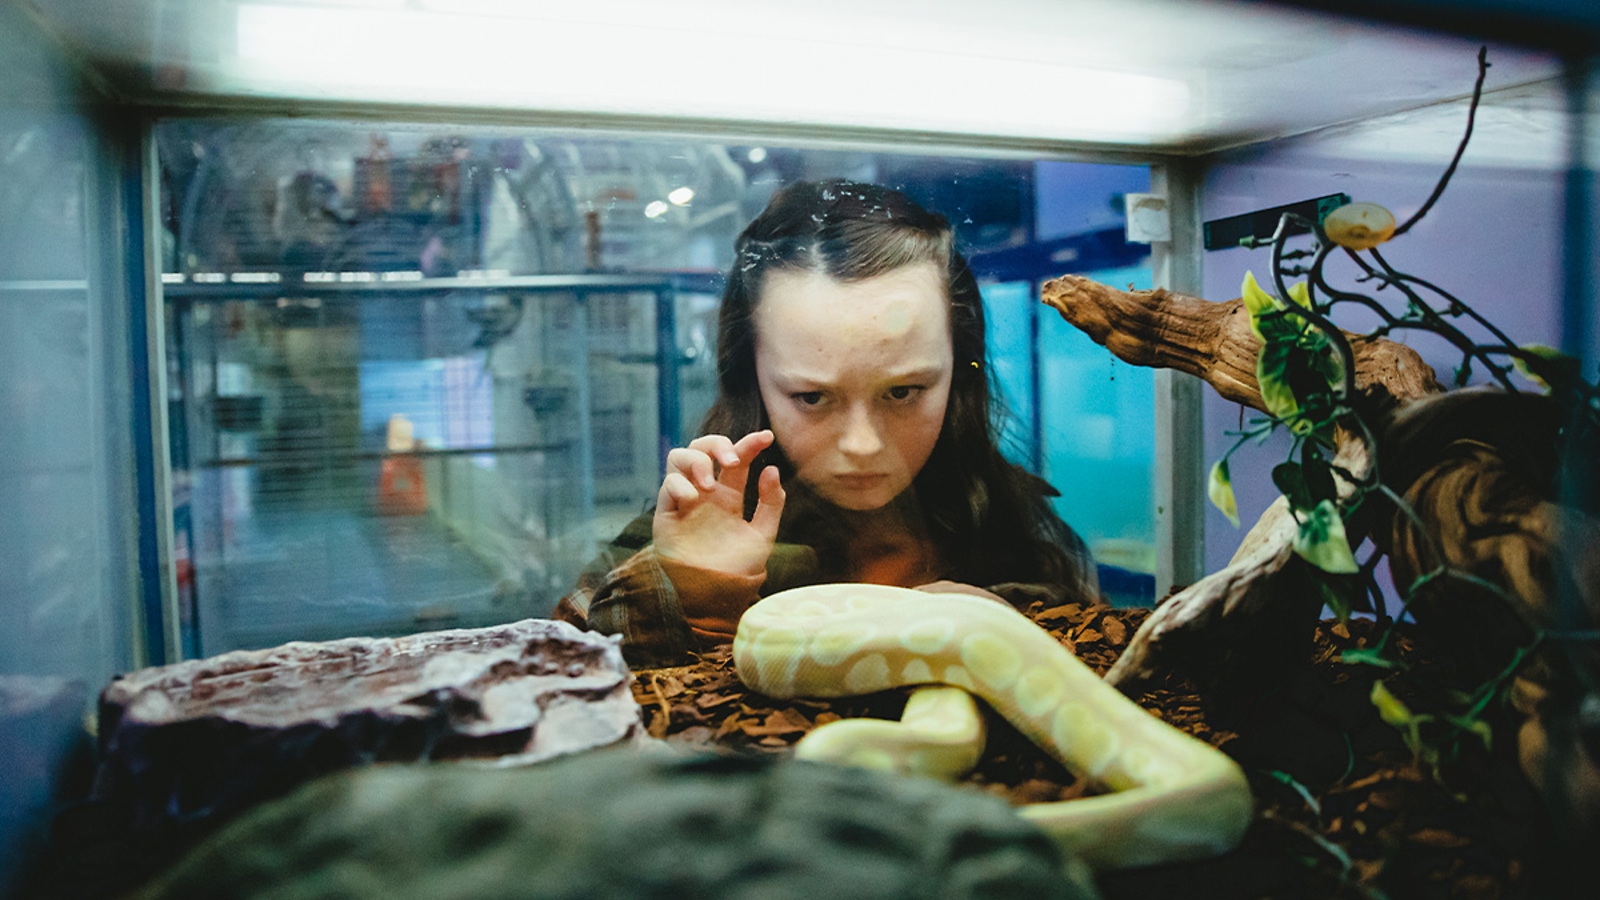 Tegan taps on the glass of a snake tank in a scene from PREDATORS